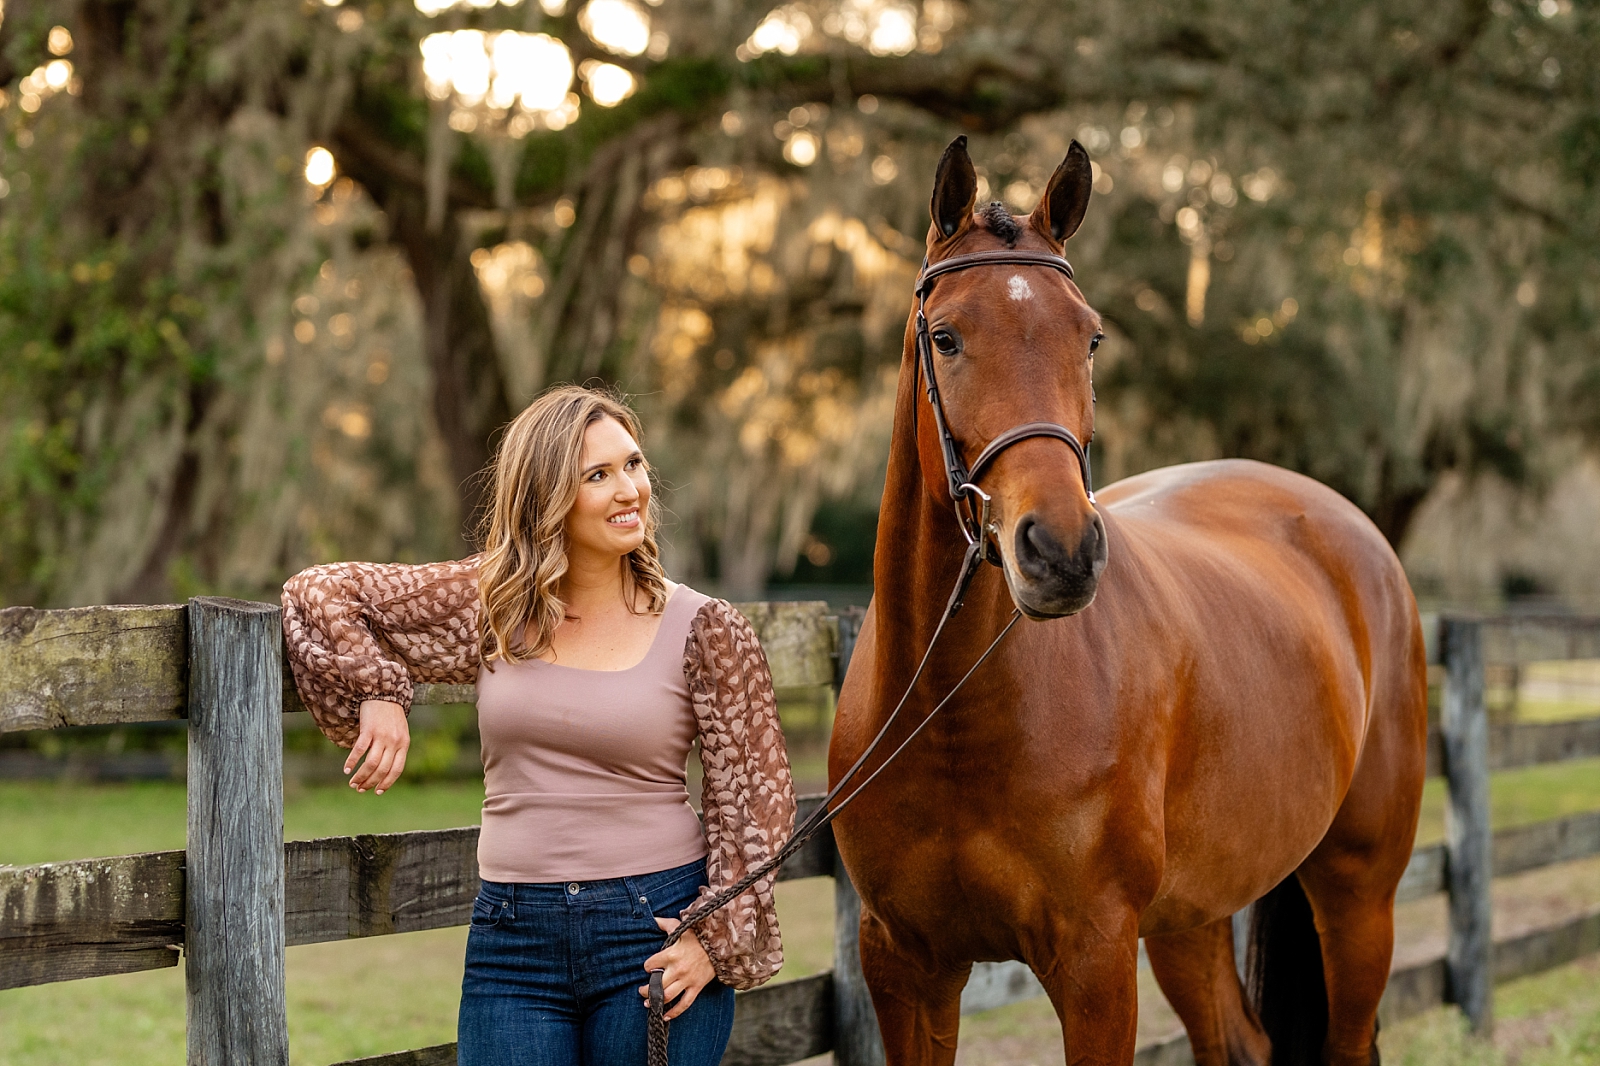 Equine Attorney at Law. Horse lawyer. Equestrian business branding.